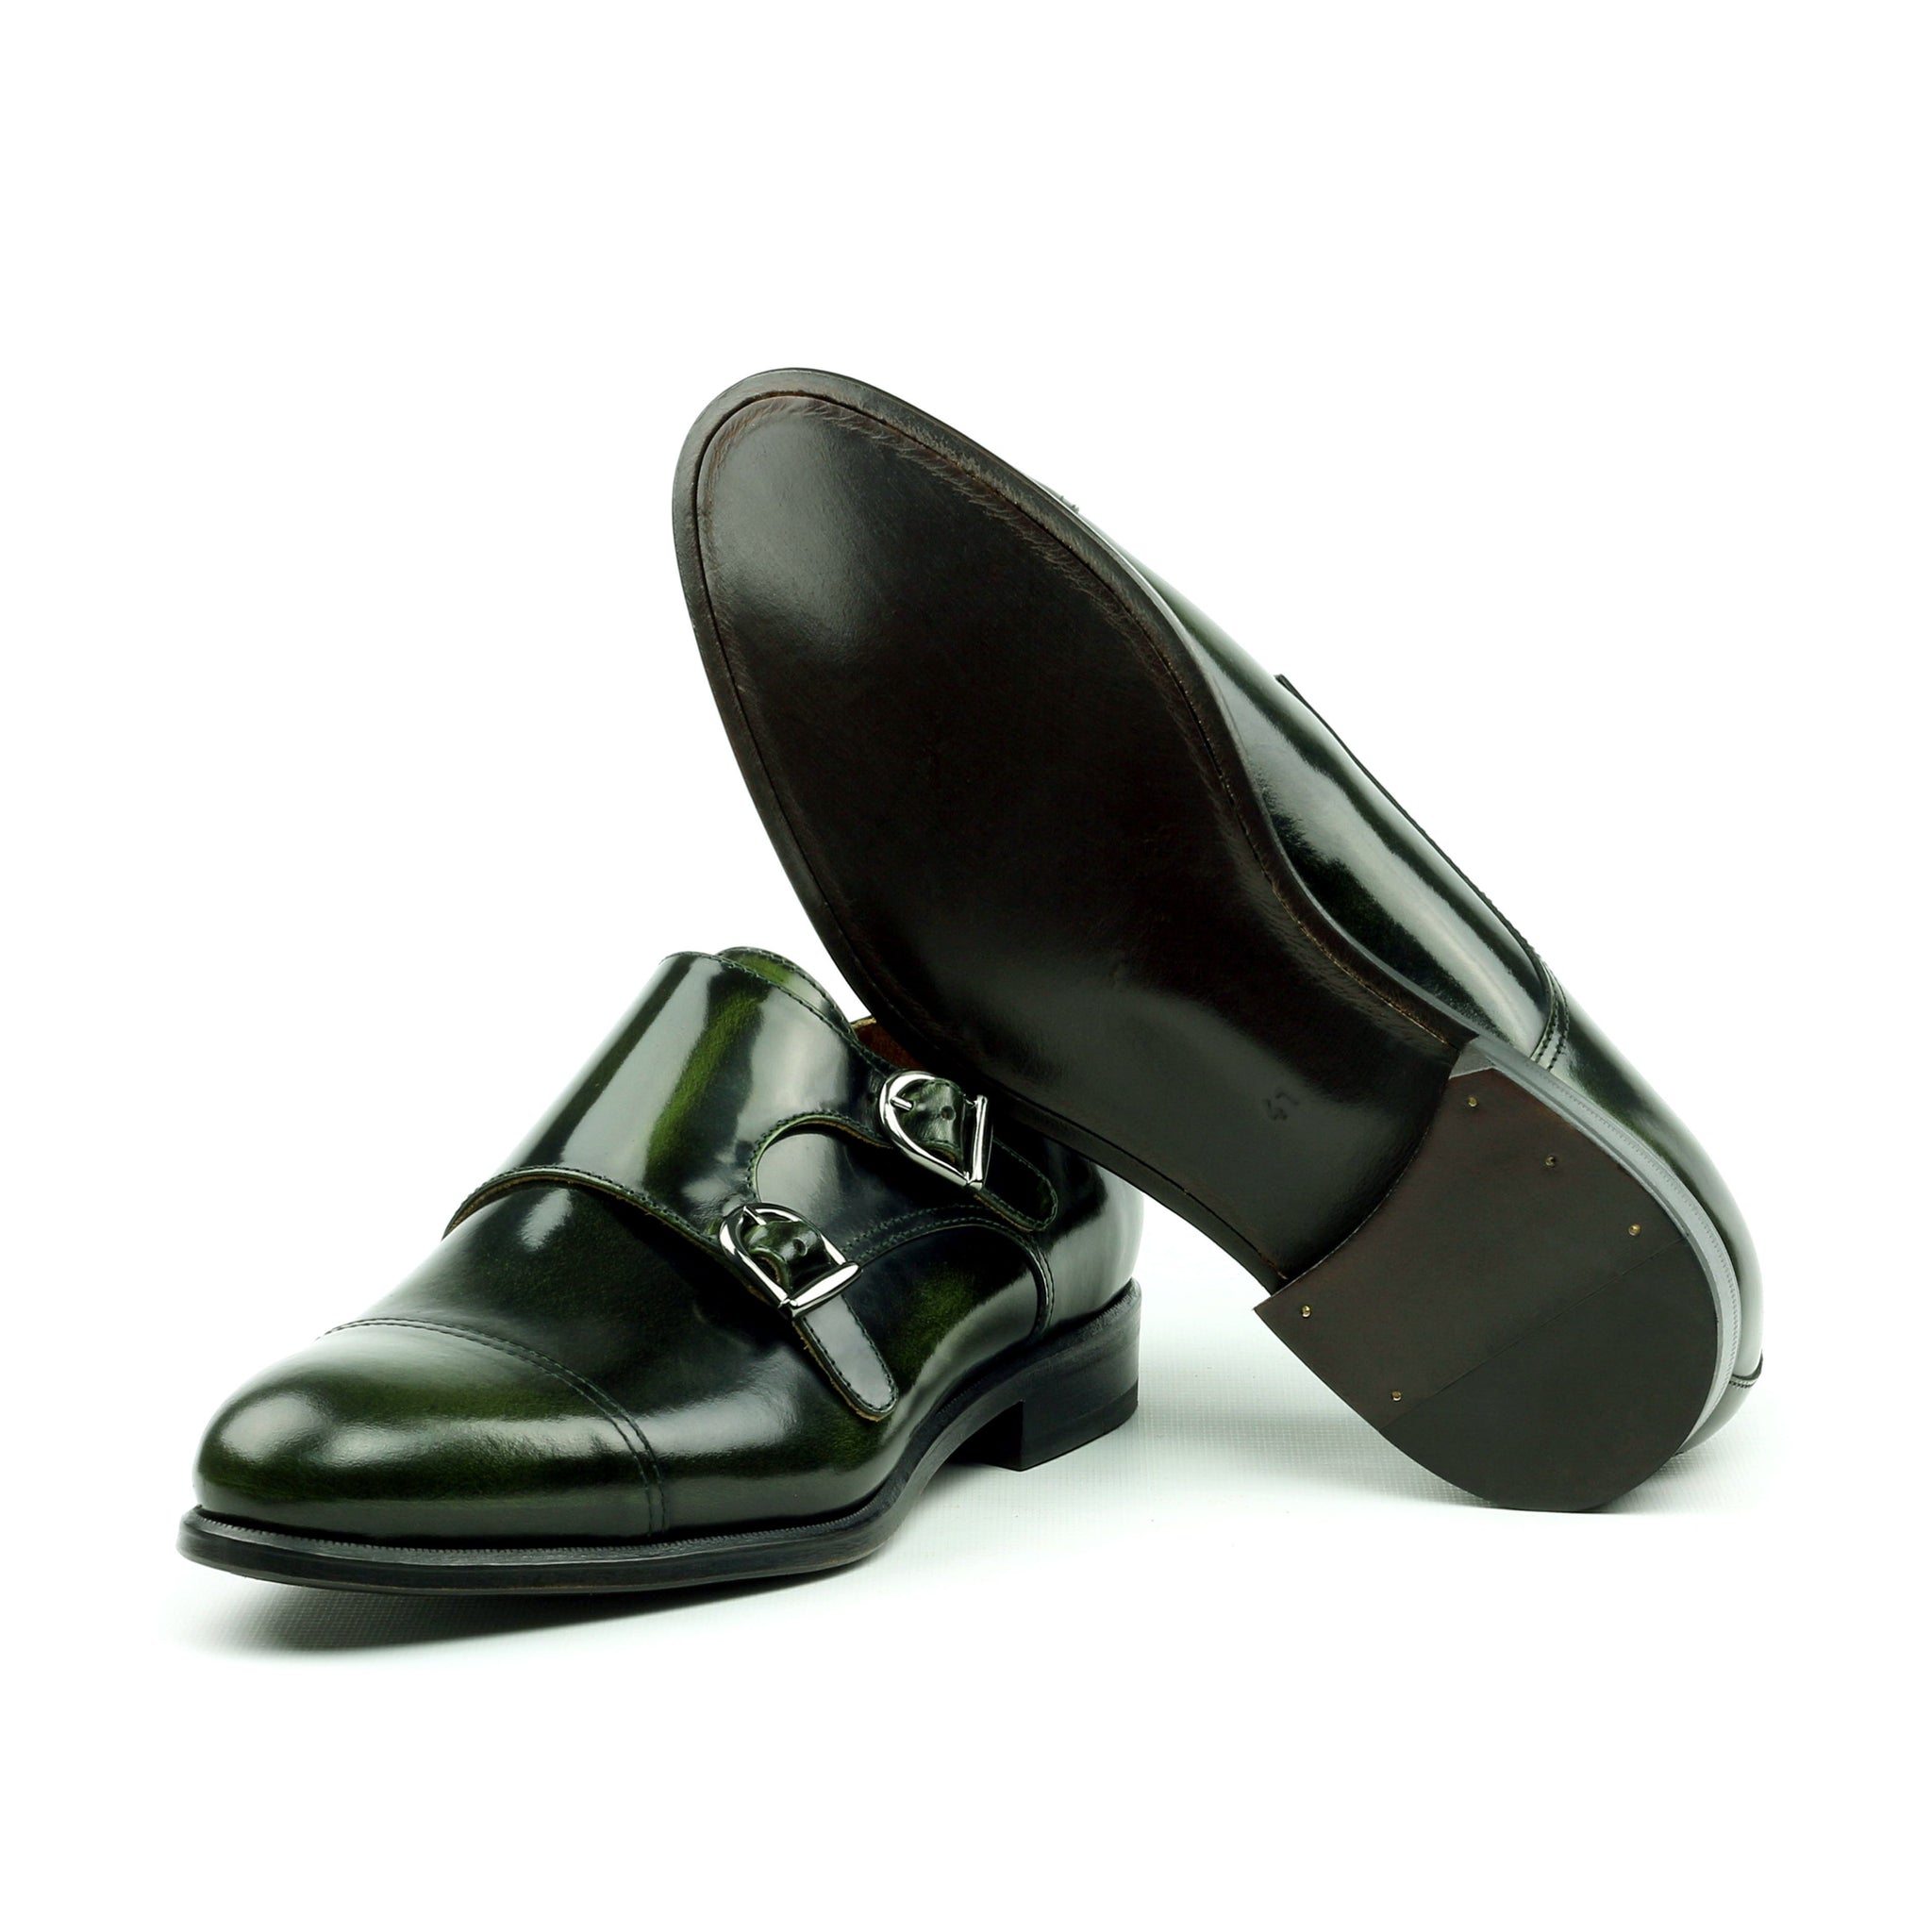 Unique Handcrafted Green Polished Calf Double Strap Monkstrap